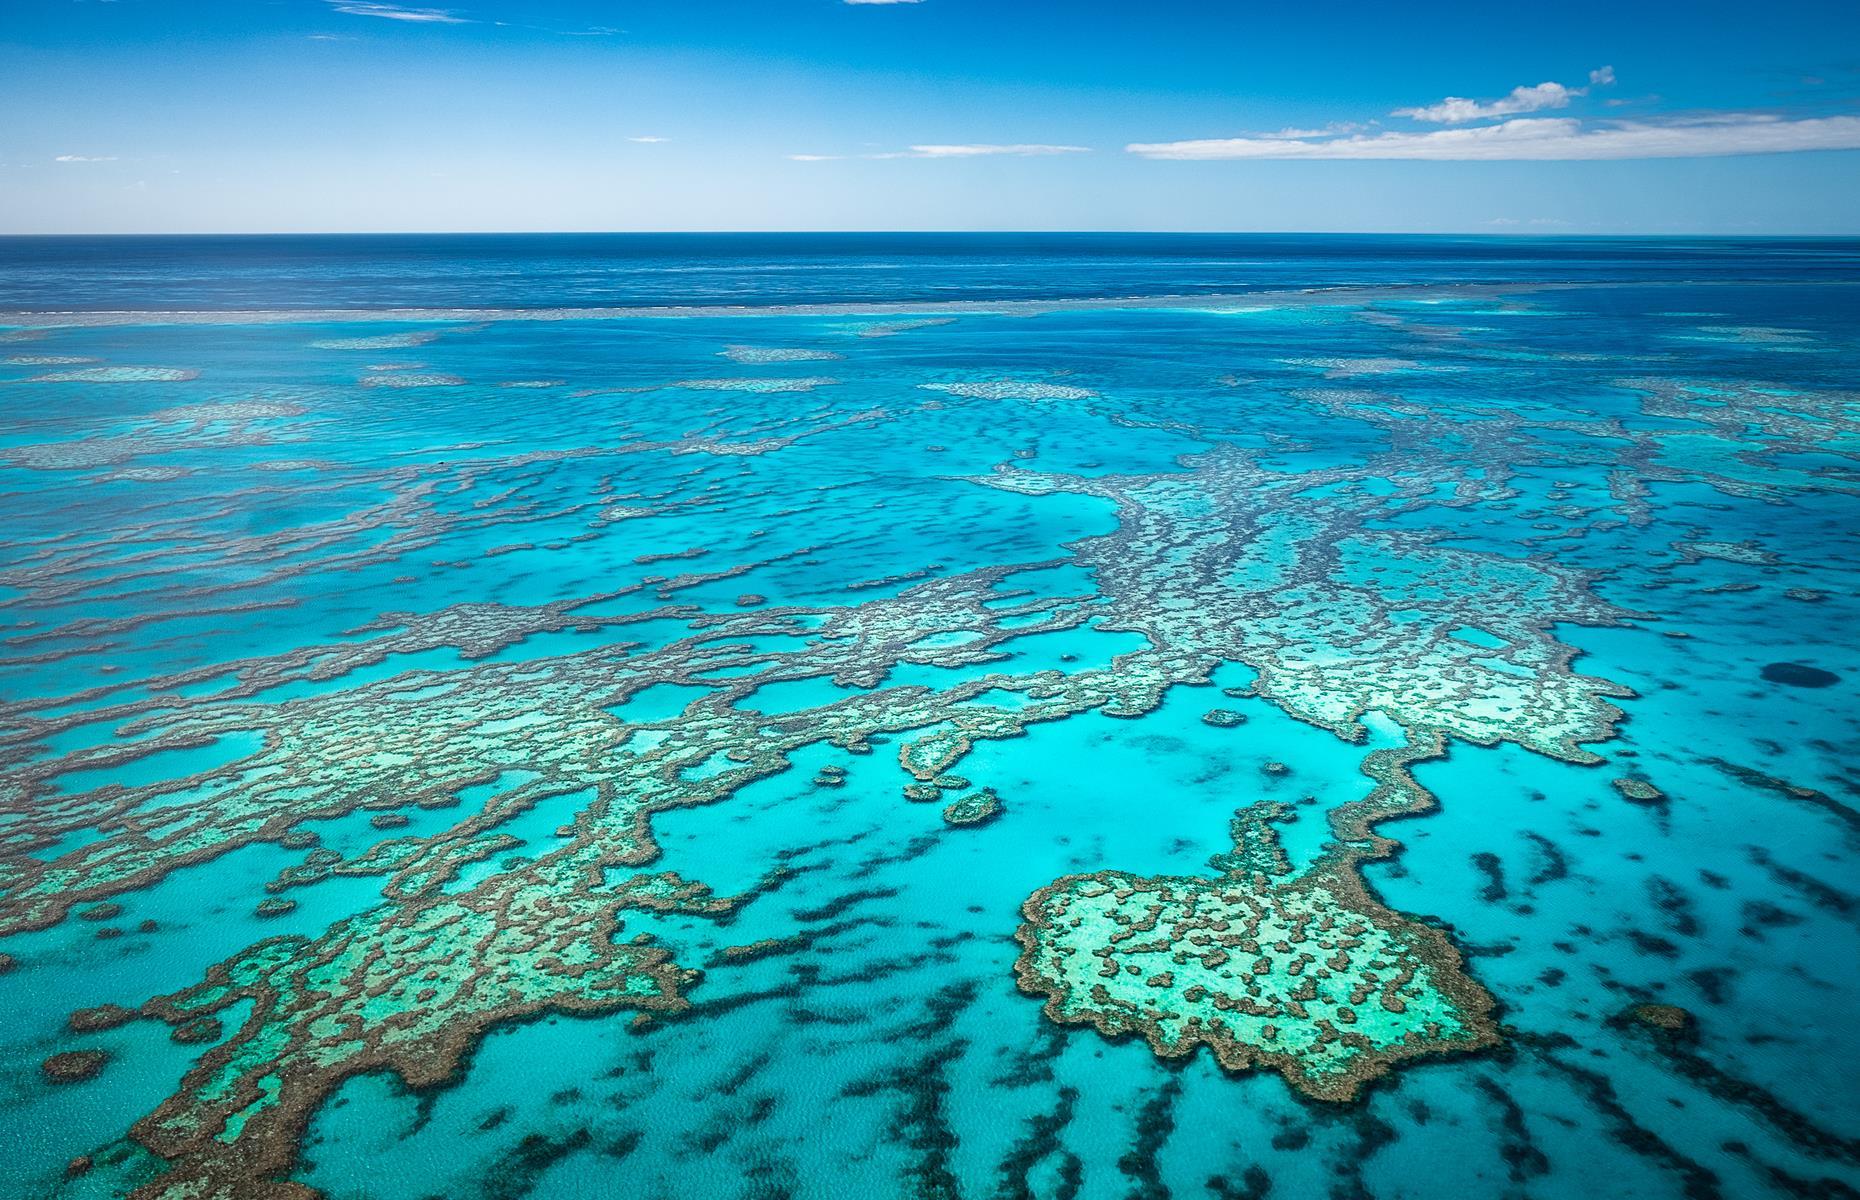 <p>The Great Barrier Reef is famously so vast it can be viewed from space. It looks good both underwater and from dry land. It’s the world’s largest reef system, made up of nearly 3,000 reefs and encompassing more than 135,000 square miles (350,000sqkm). It’s also home to whales, dolphins, sea turtles and thousands of species of fish. Even without all that, the dazzling, dappled expanse of blue is pretty lovely to look at.</p>